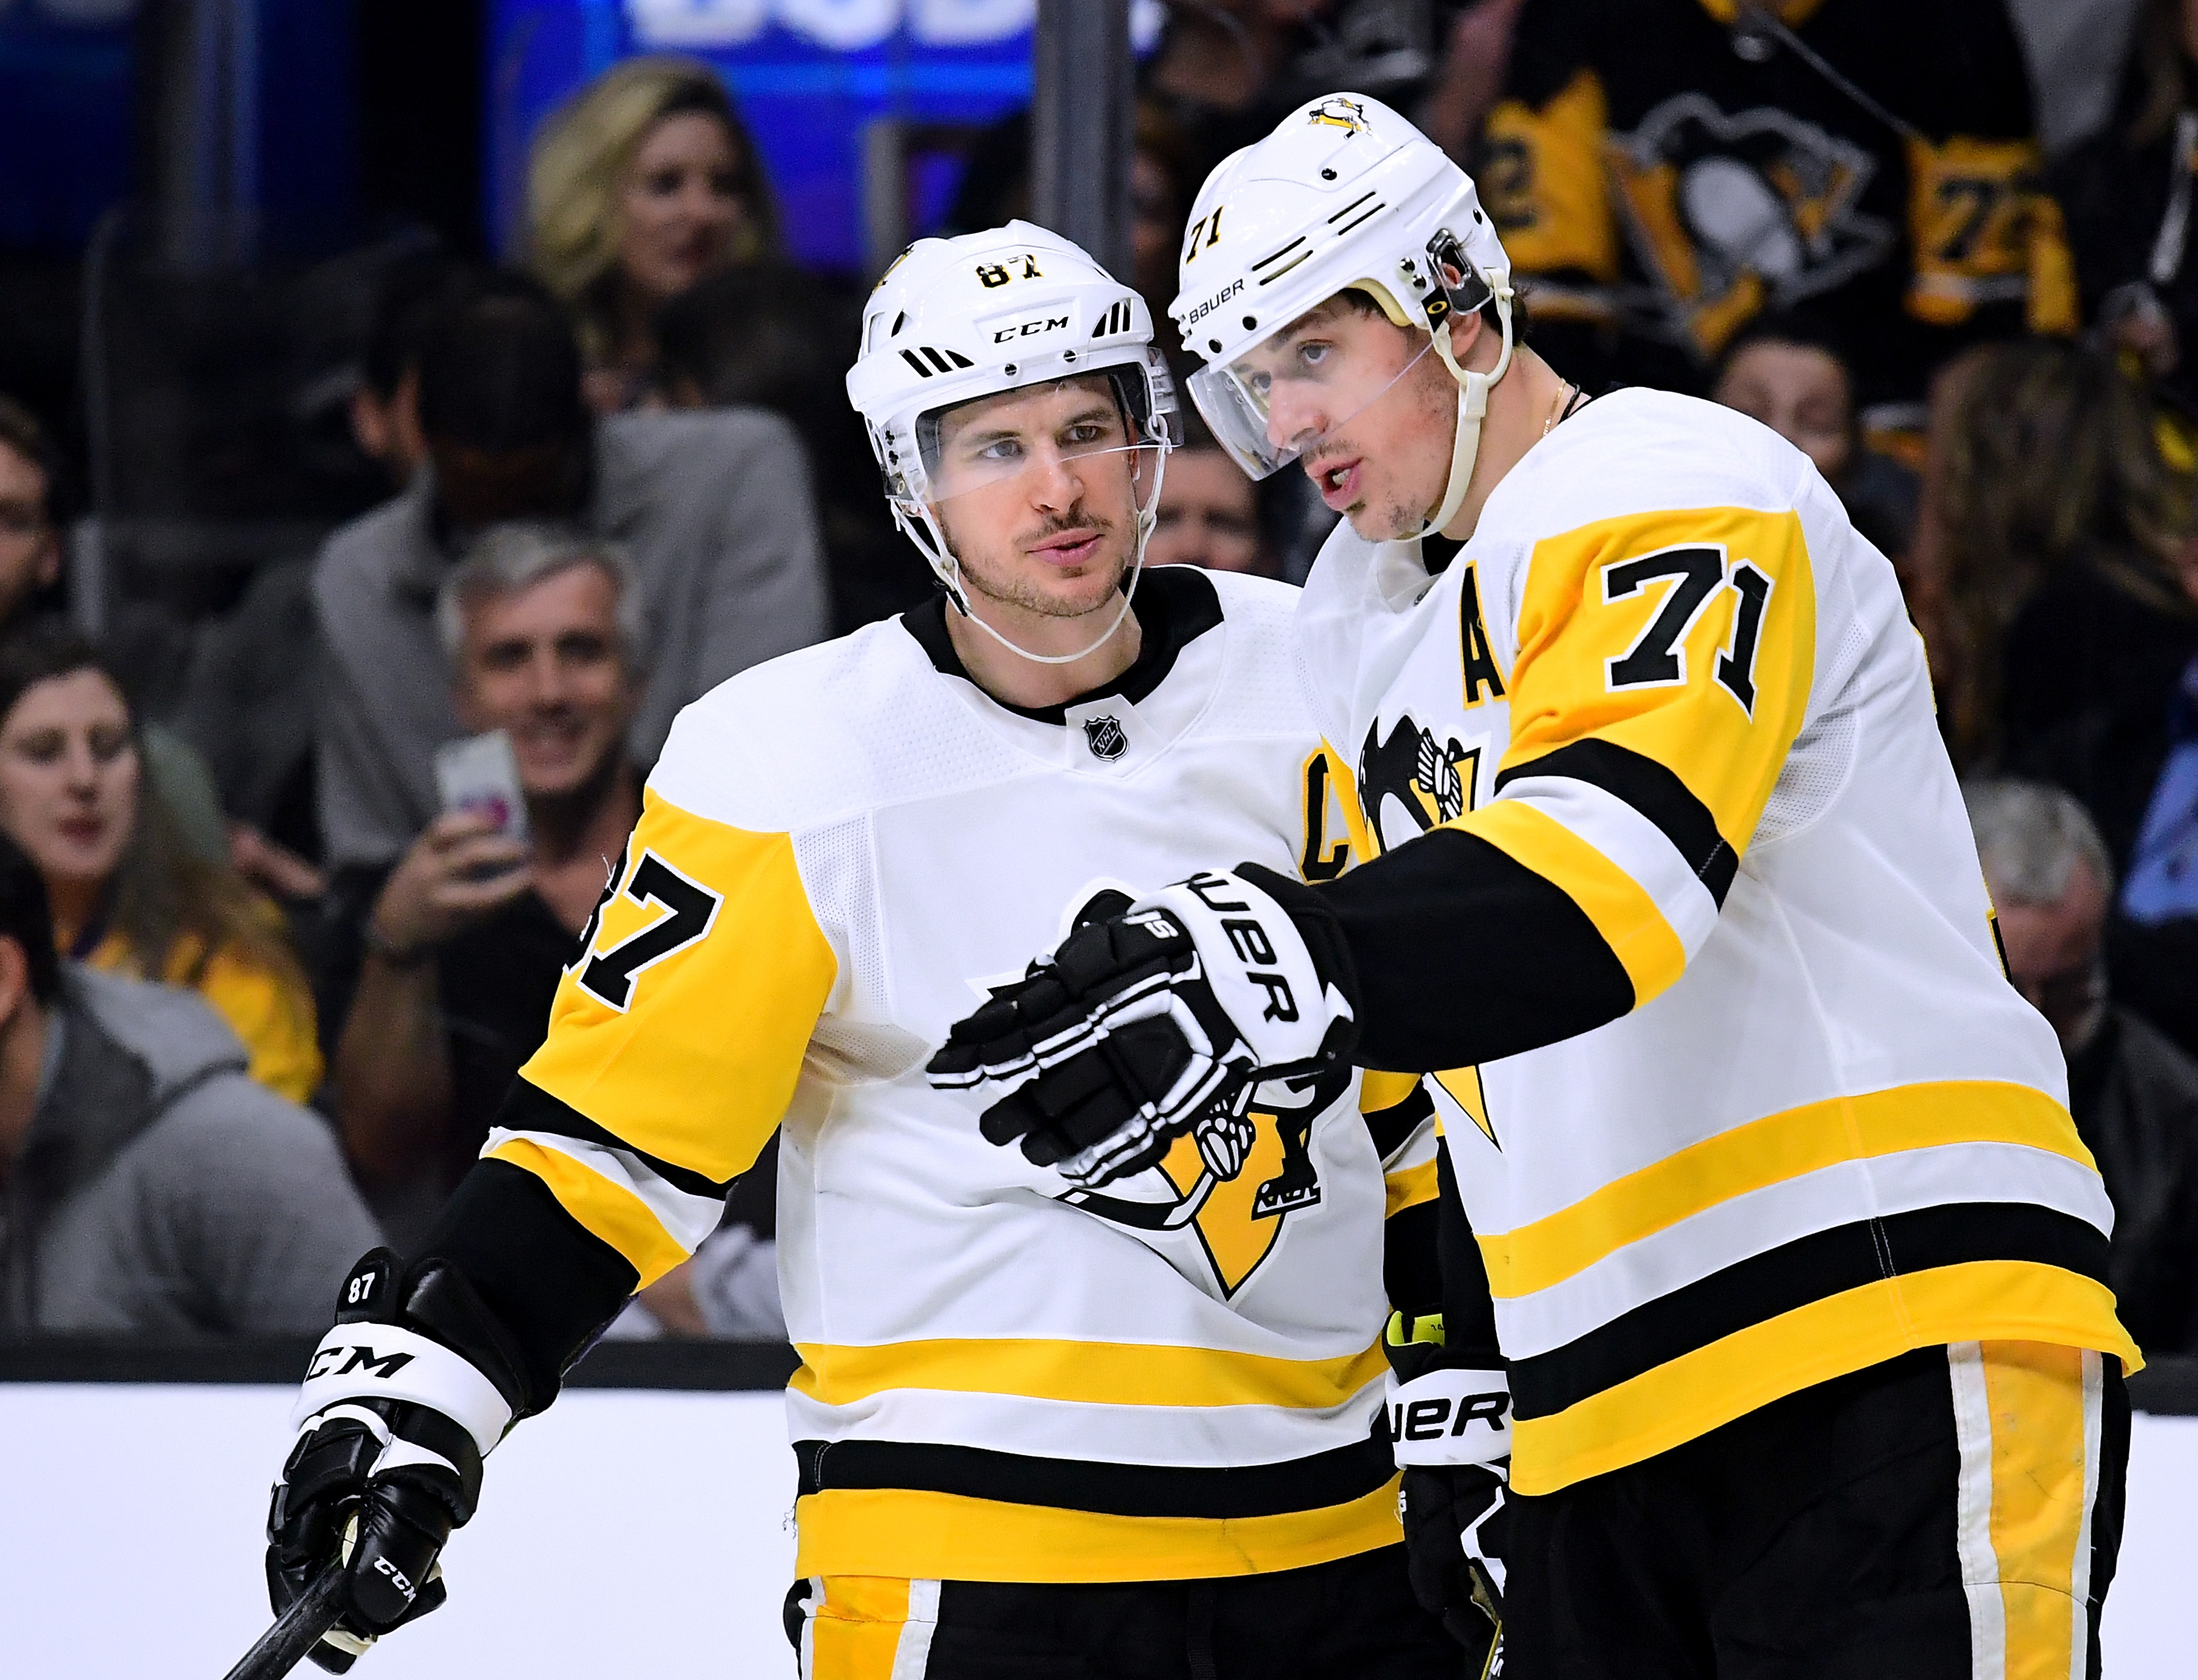 Lemieux dominates Penguins' top NHL All-Star Game moments